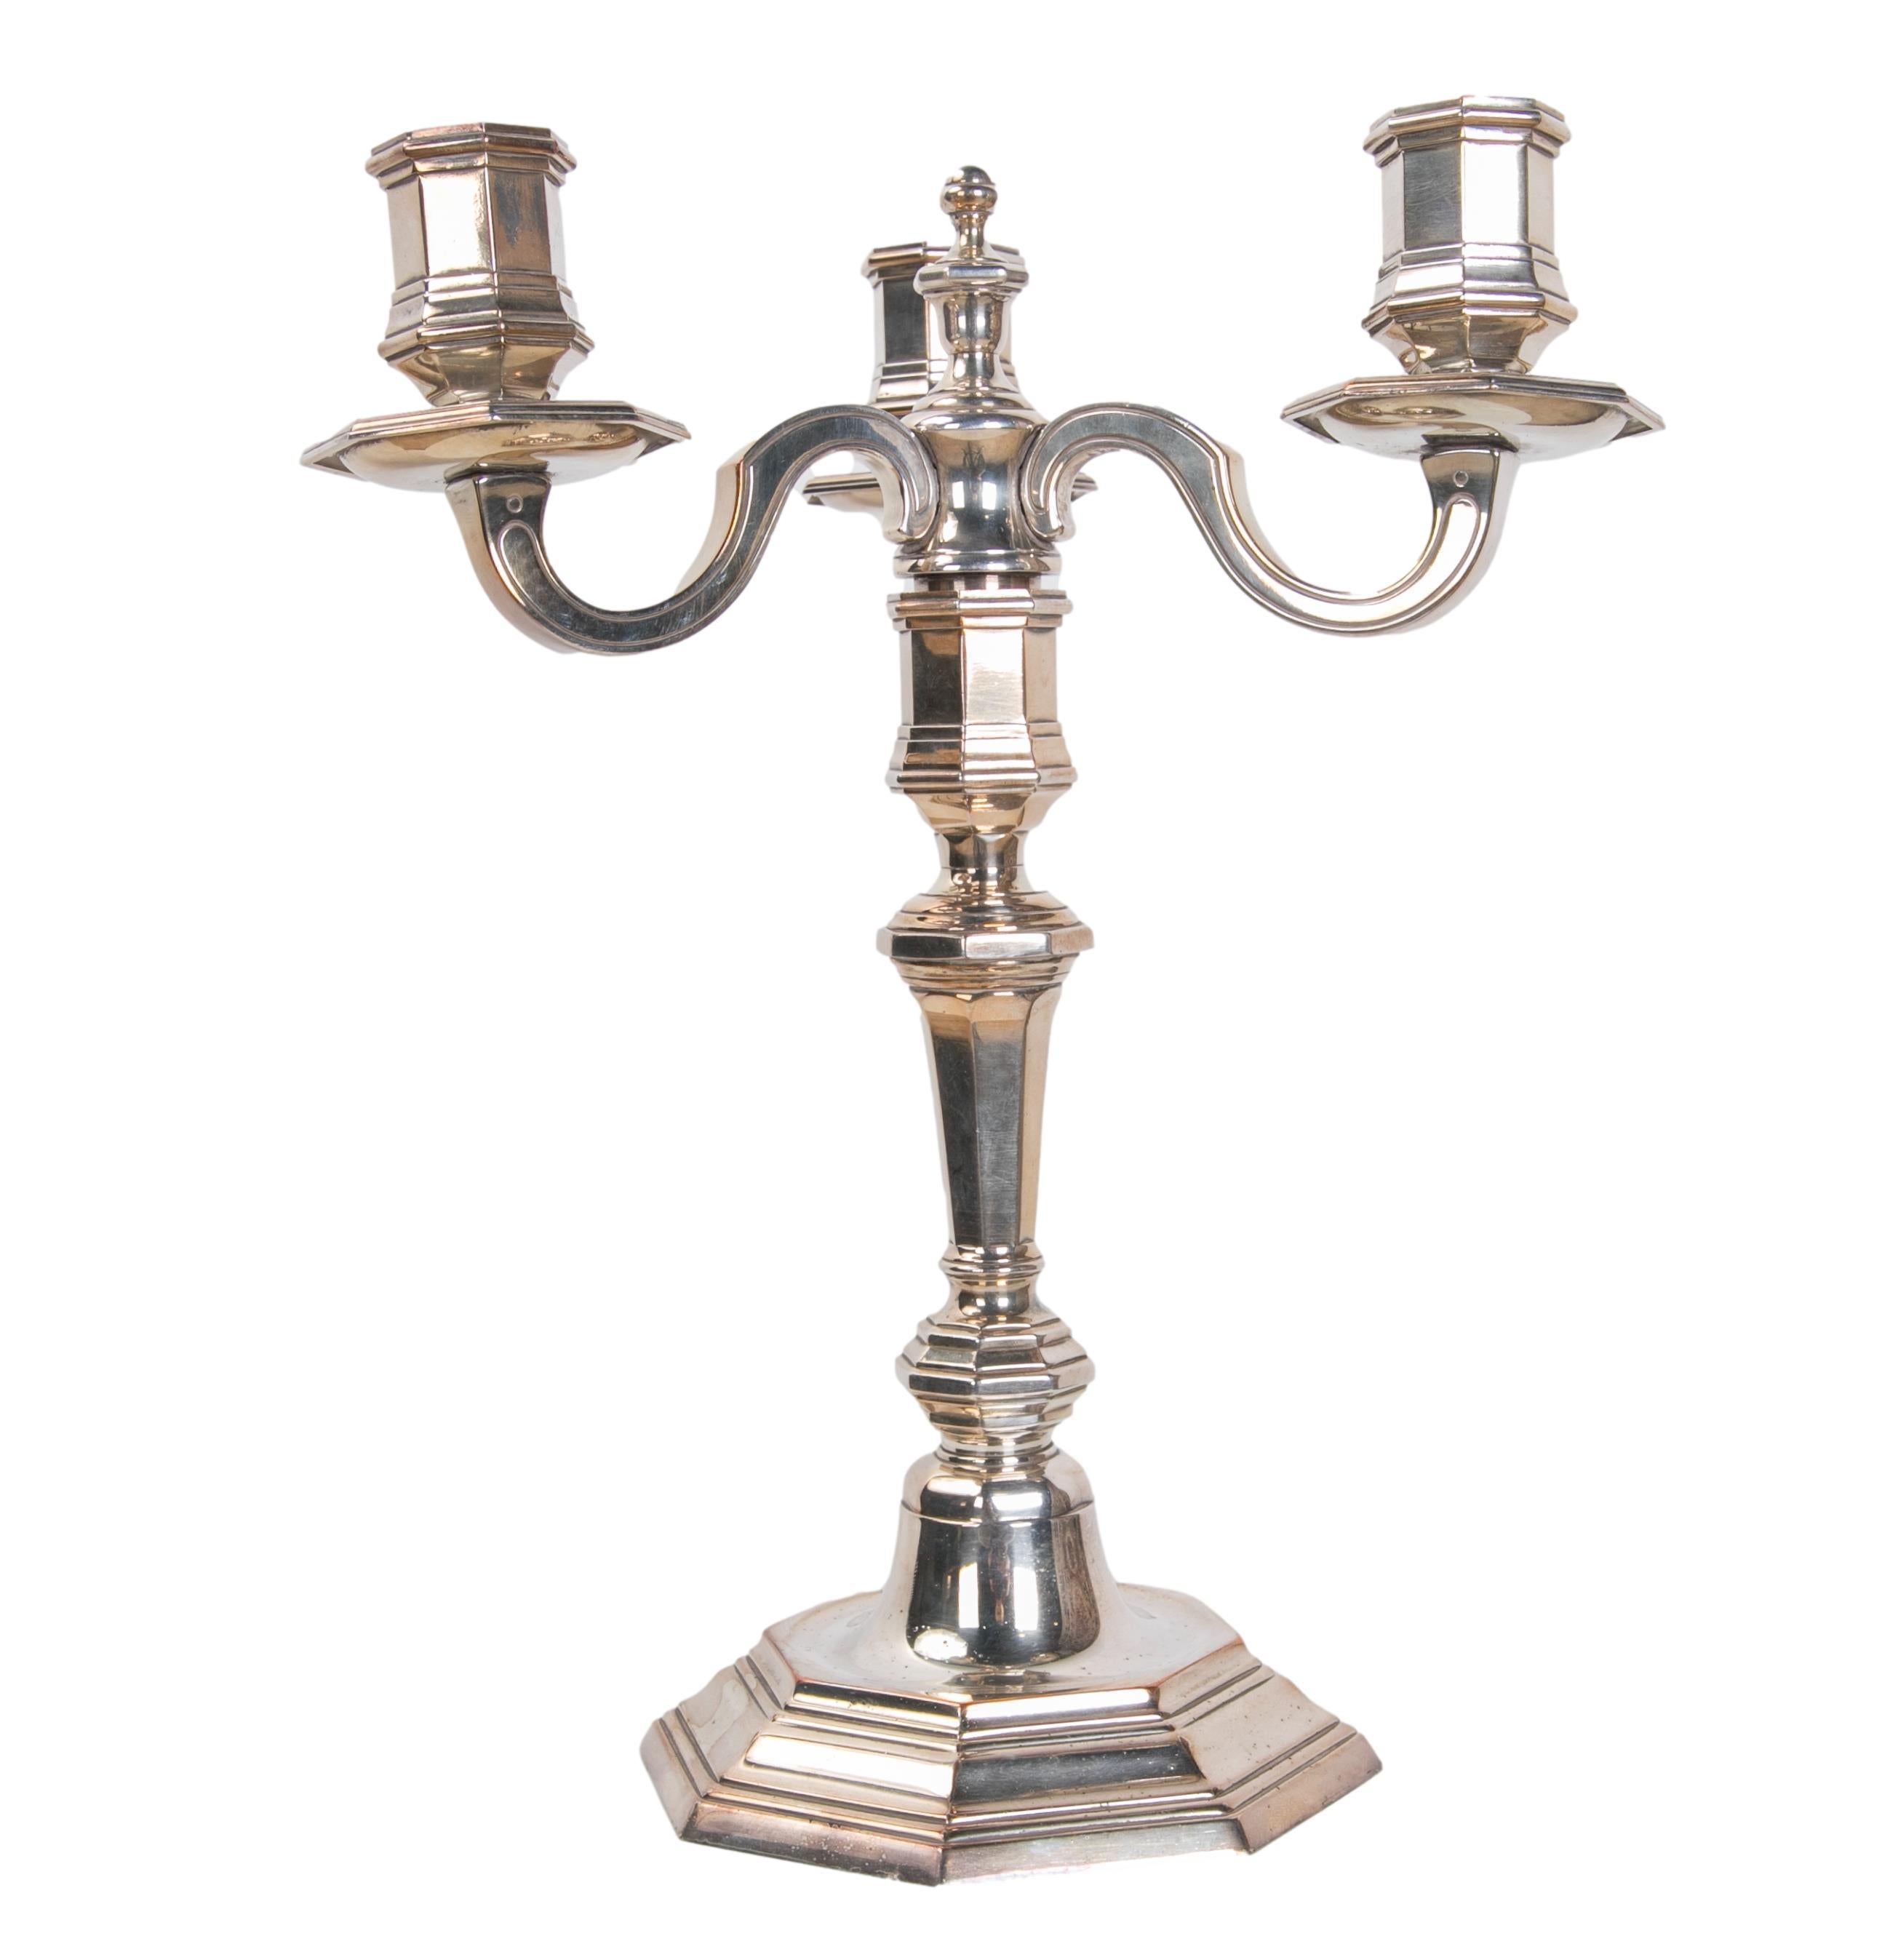 1980s French silver plated metal candlestick by Christofle France.